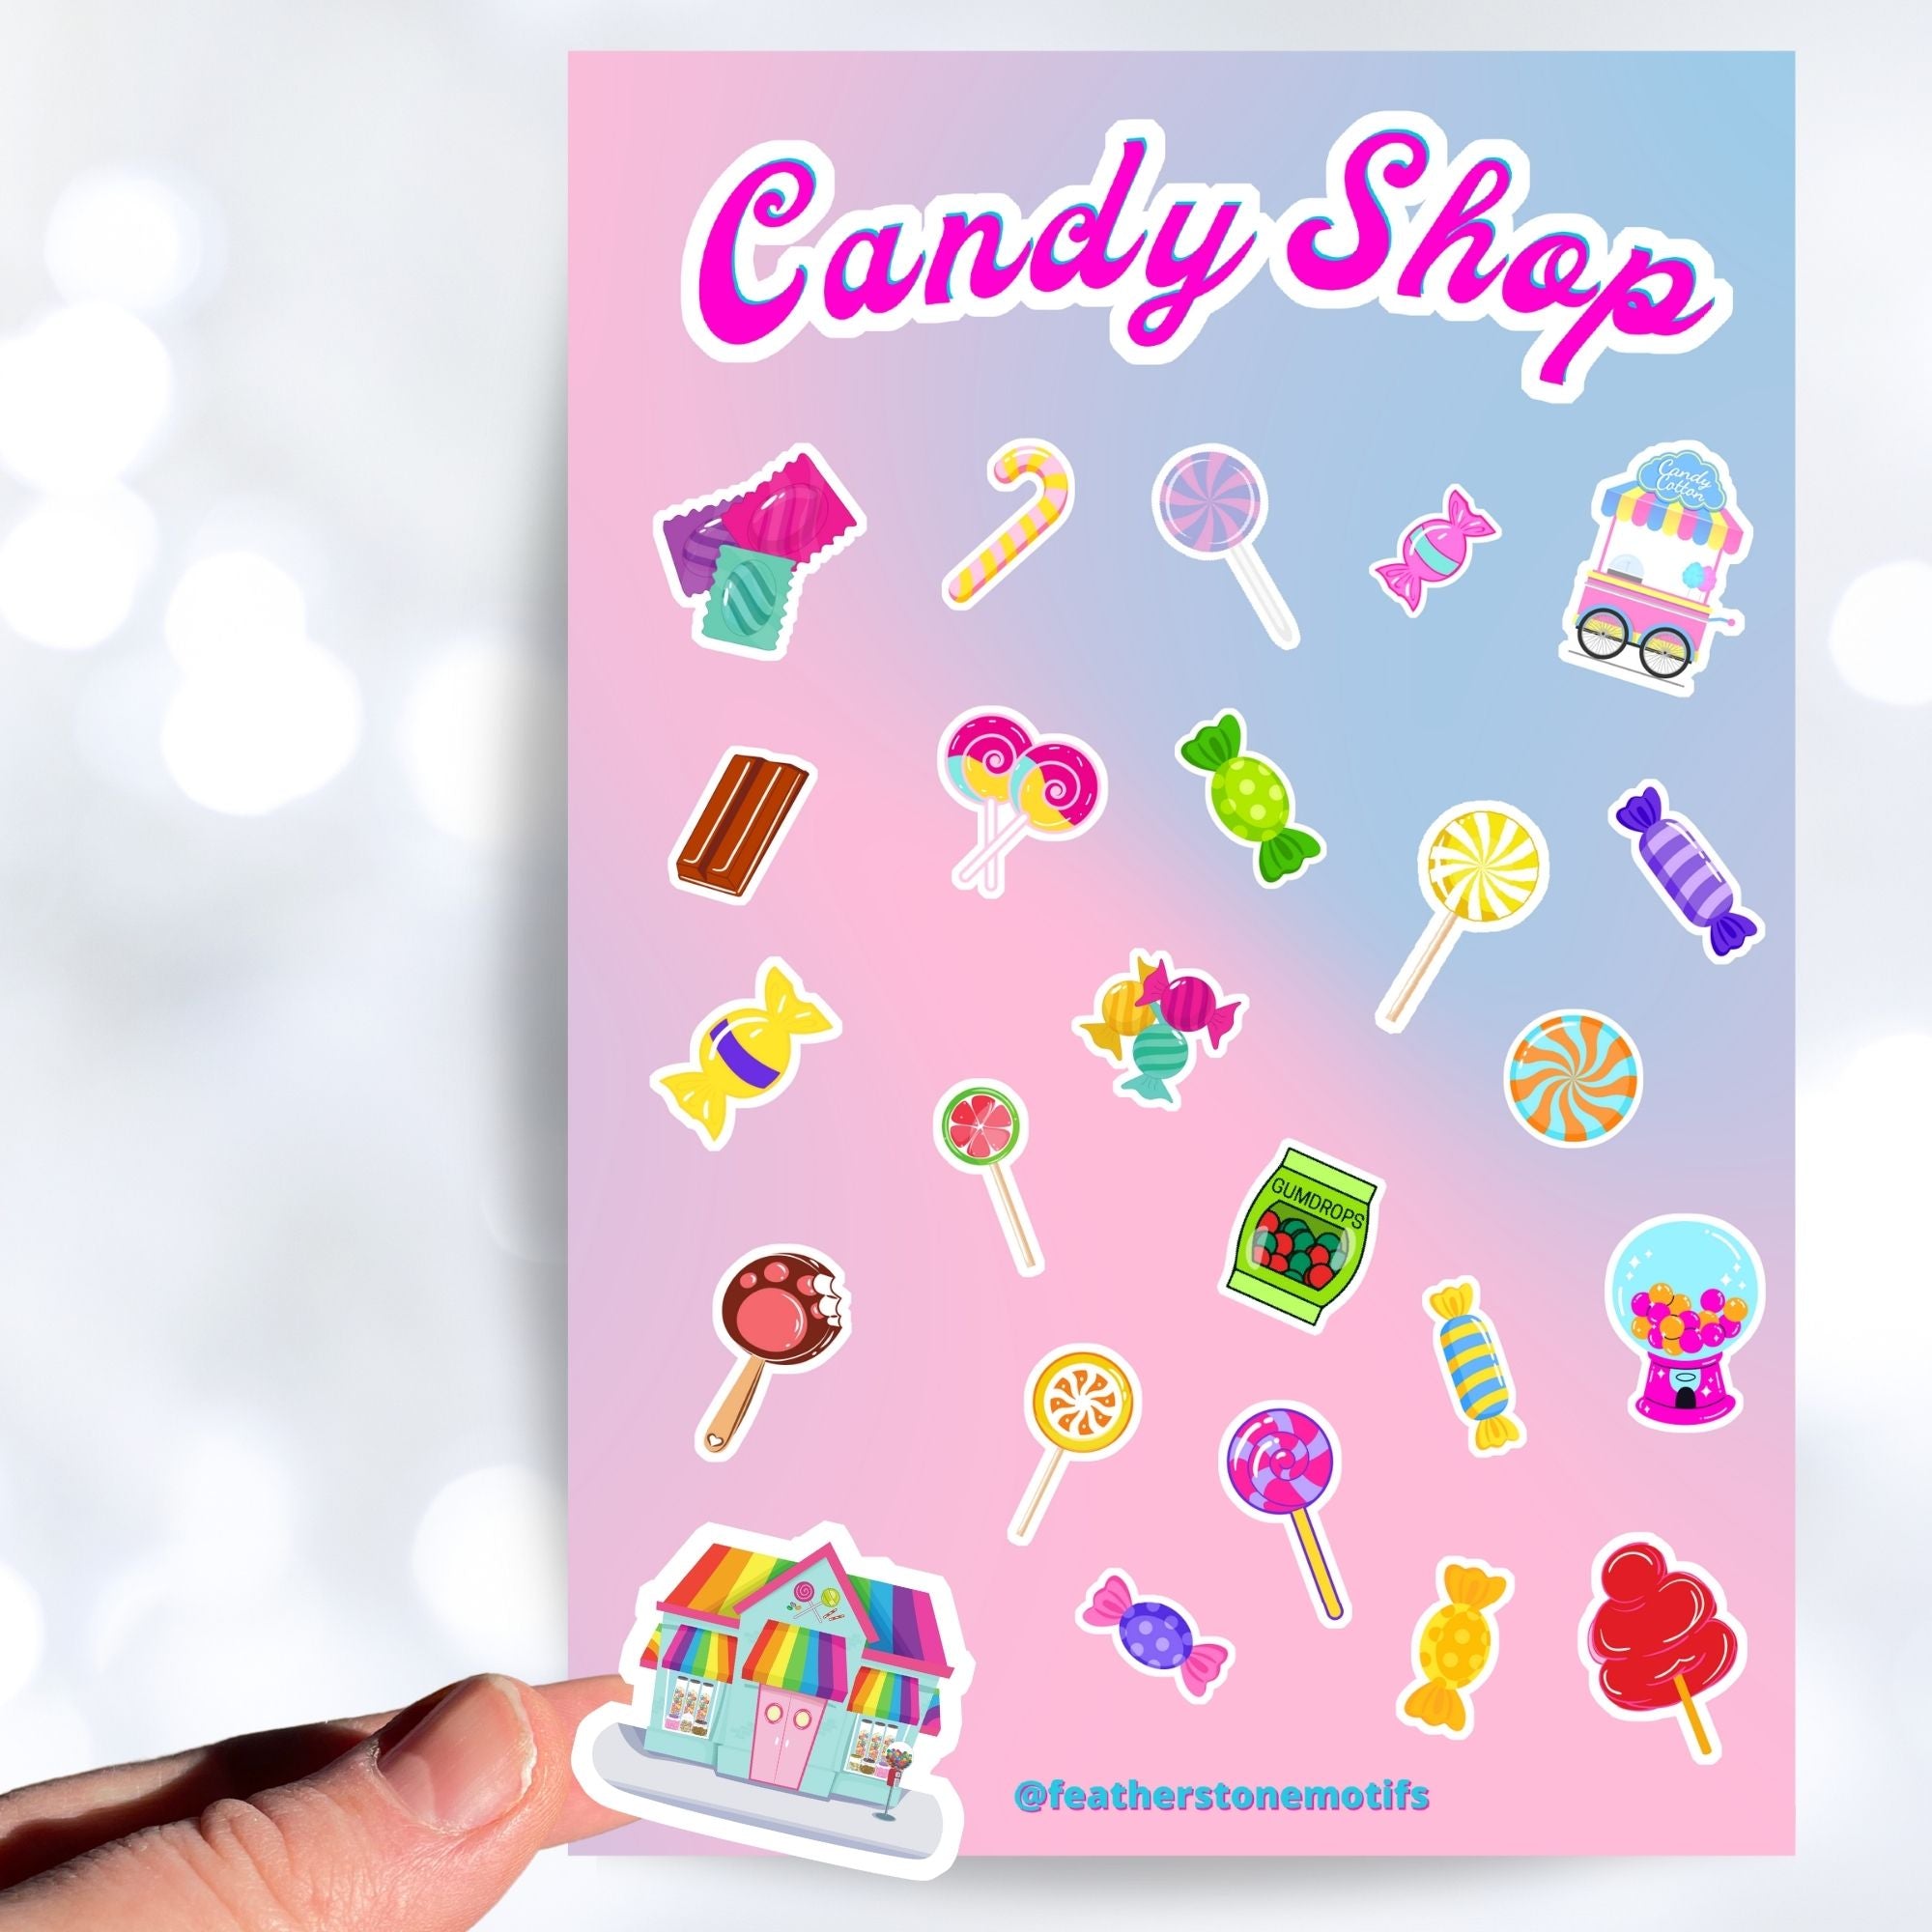 This sticker sheet is filled with stickers of all of your favorite sweet treats! Gumdrops, lollipops, cotton candy, and of course chocolate; this sheet will satisfy everyone's sweet cravings. This image shows a hand holding a candy store sticker above the sticker sheet.